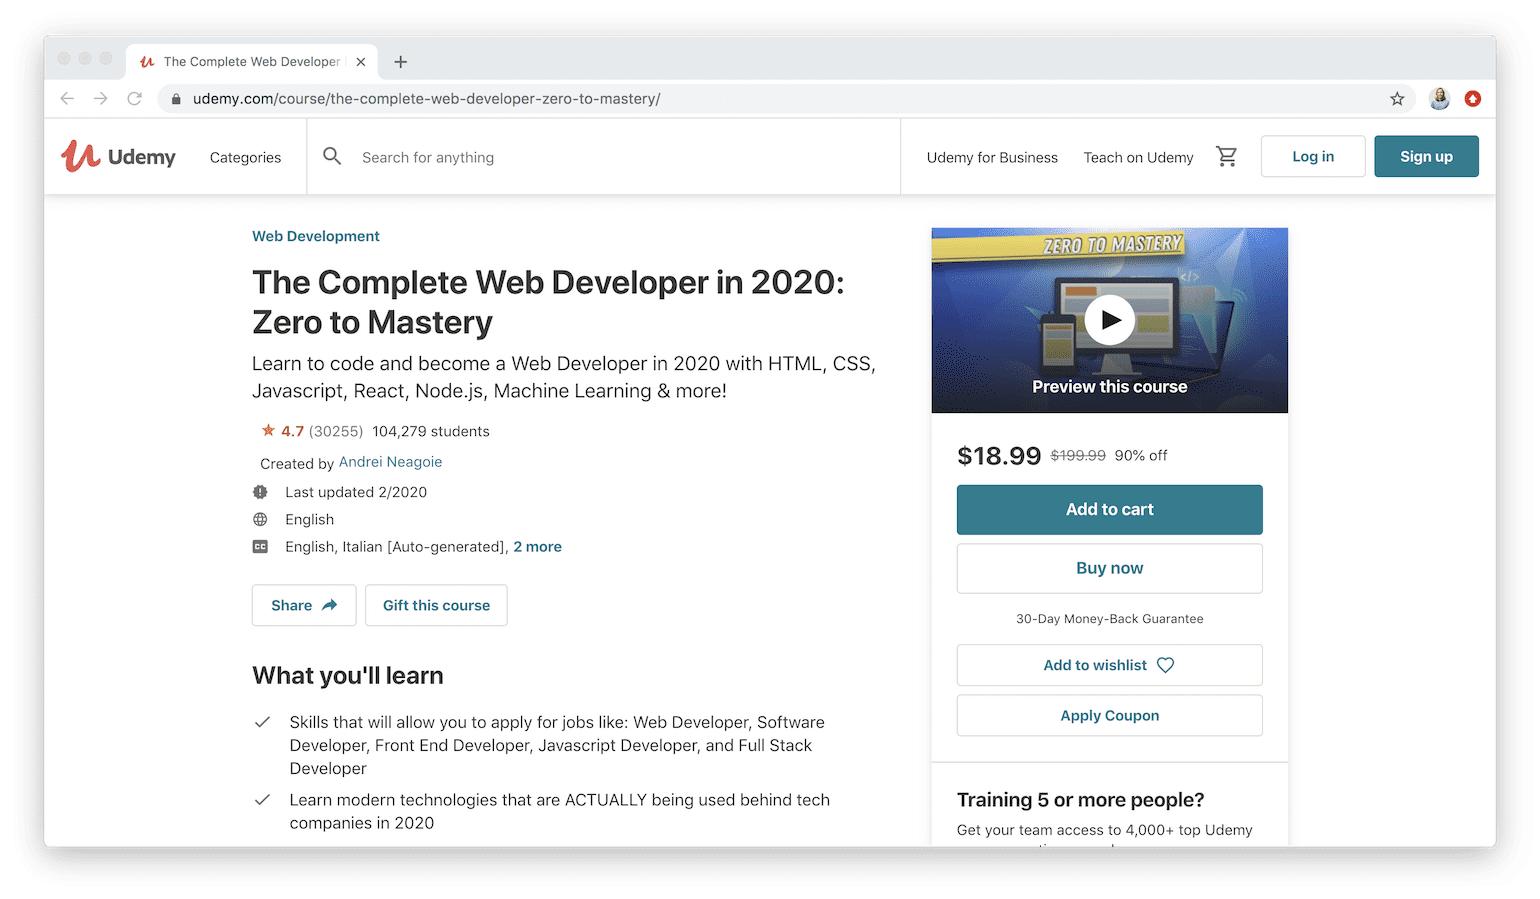 The Complete Web Developer in 2020: Zero to Mastery on Udemy